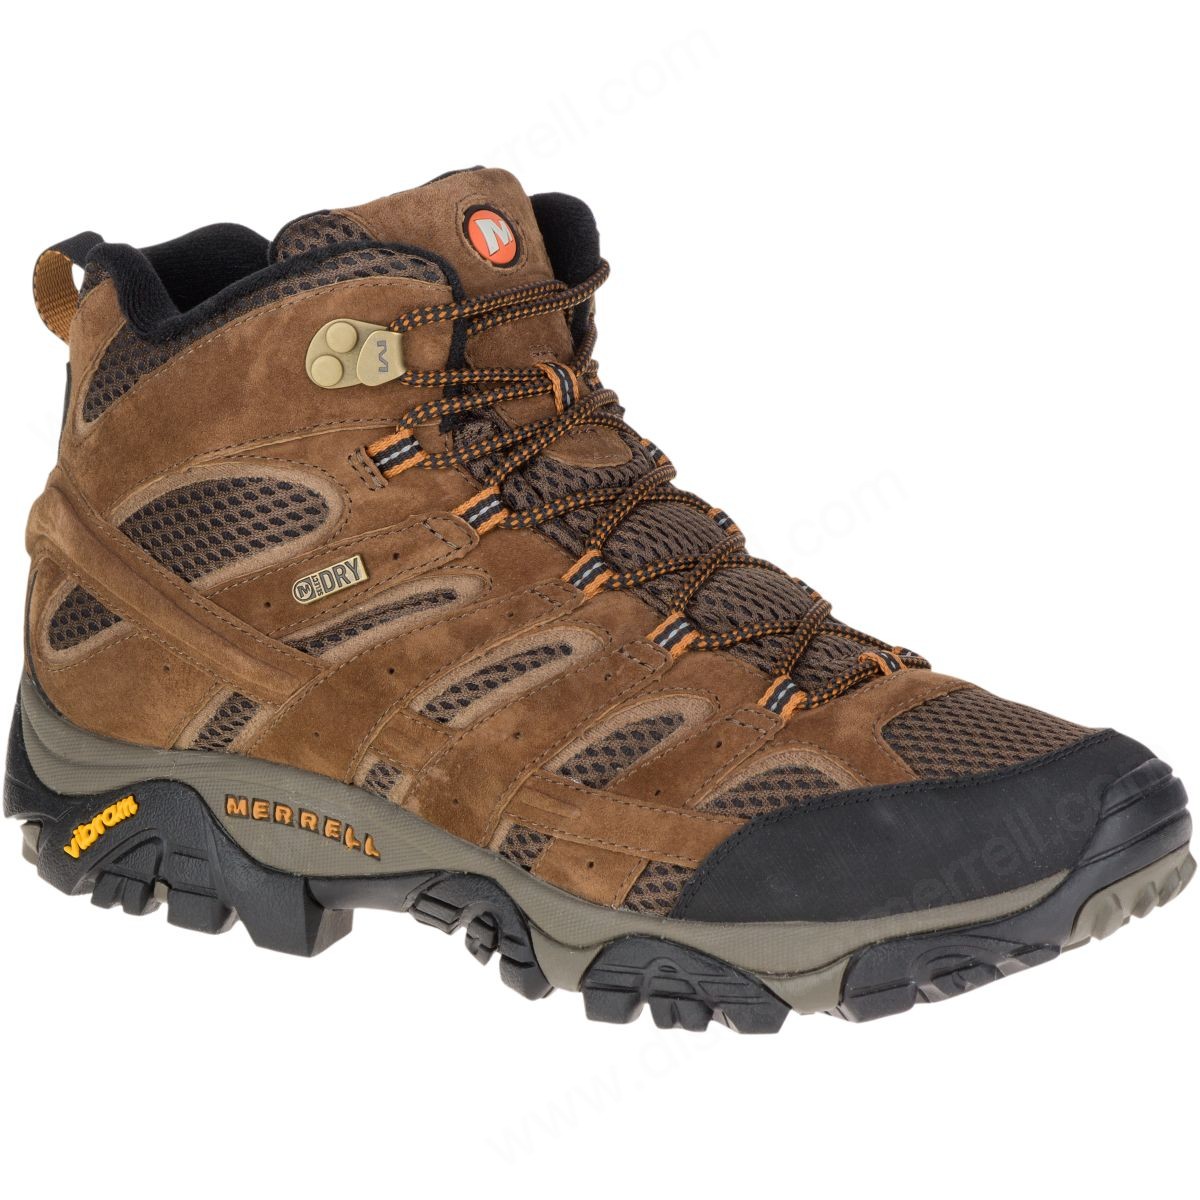 Merrell Man's Moab Mother Of All Boots™ Mid Waterproof Earth - Merrell Man's Moab Mother Of All Boots™ Mid Waterproof Earth